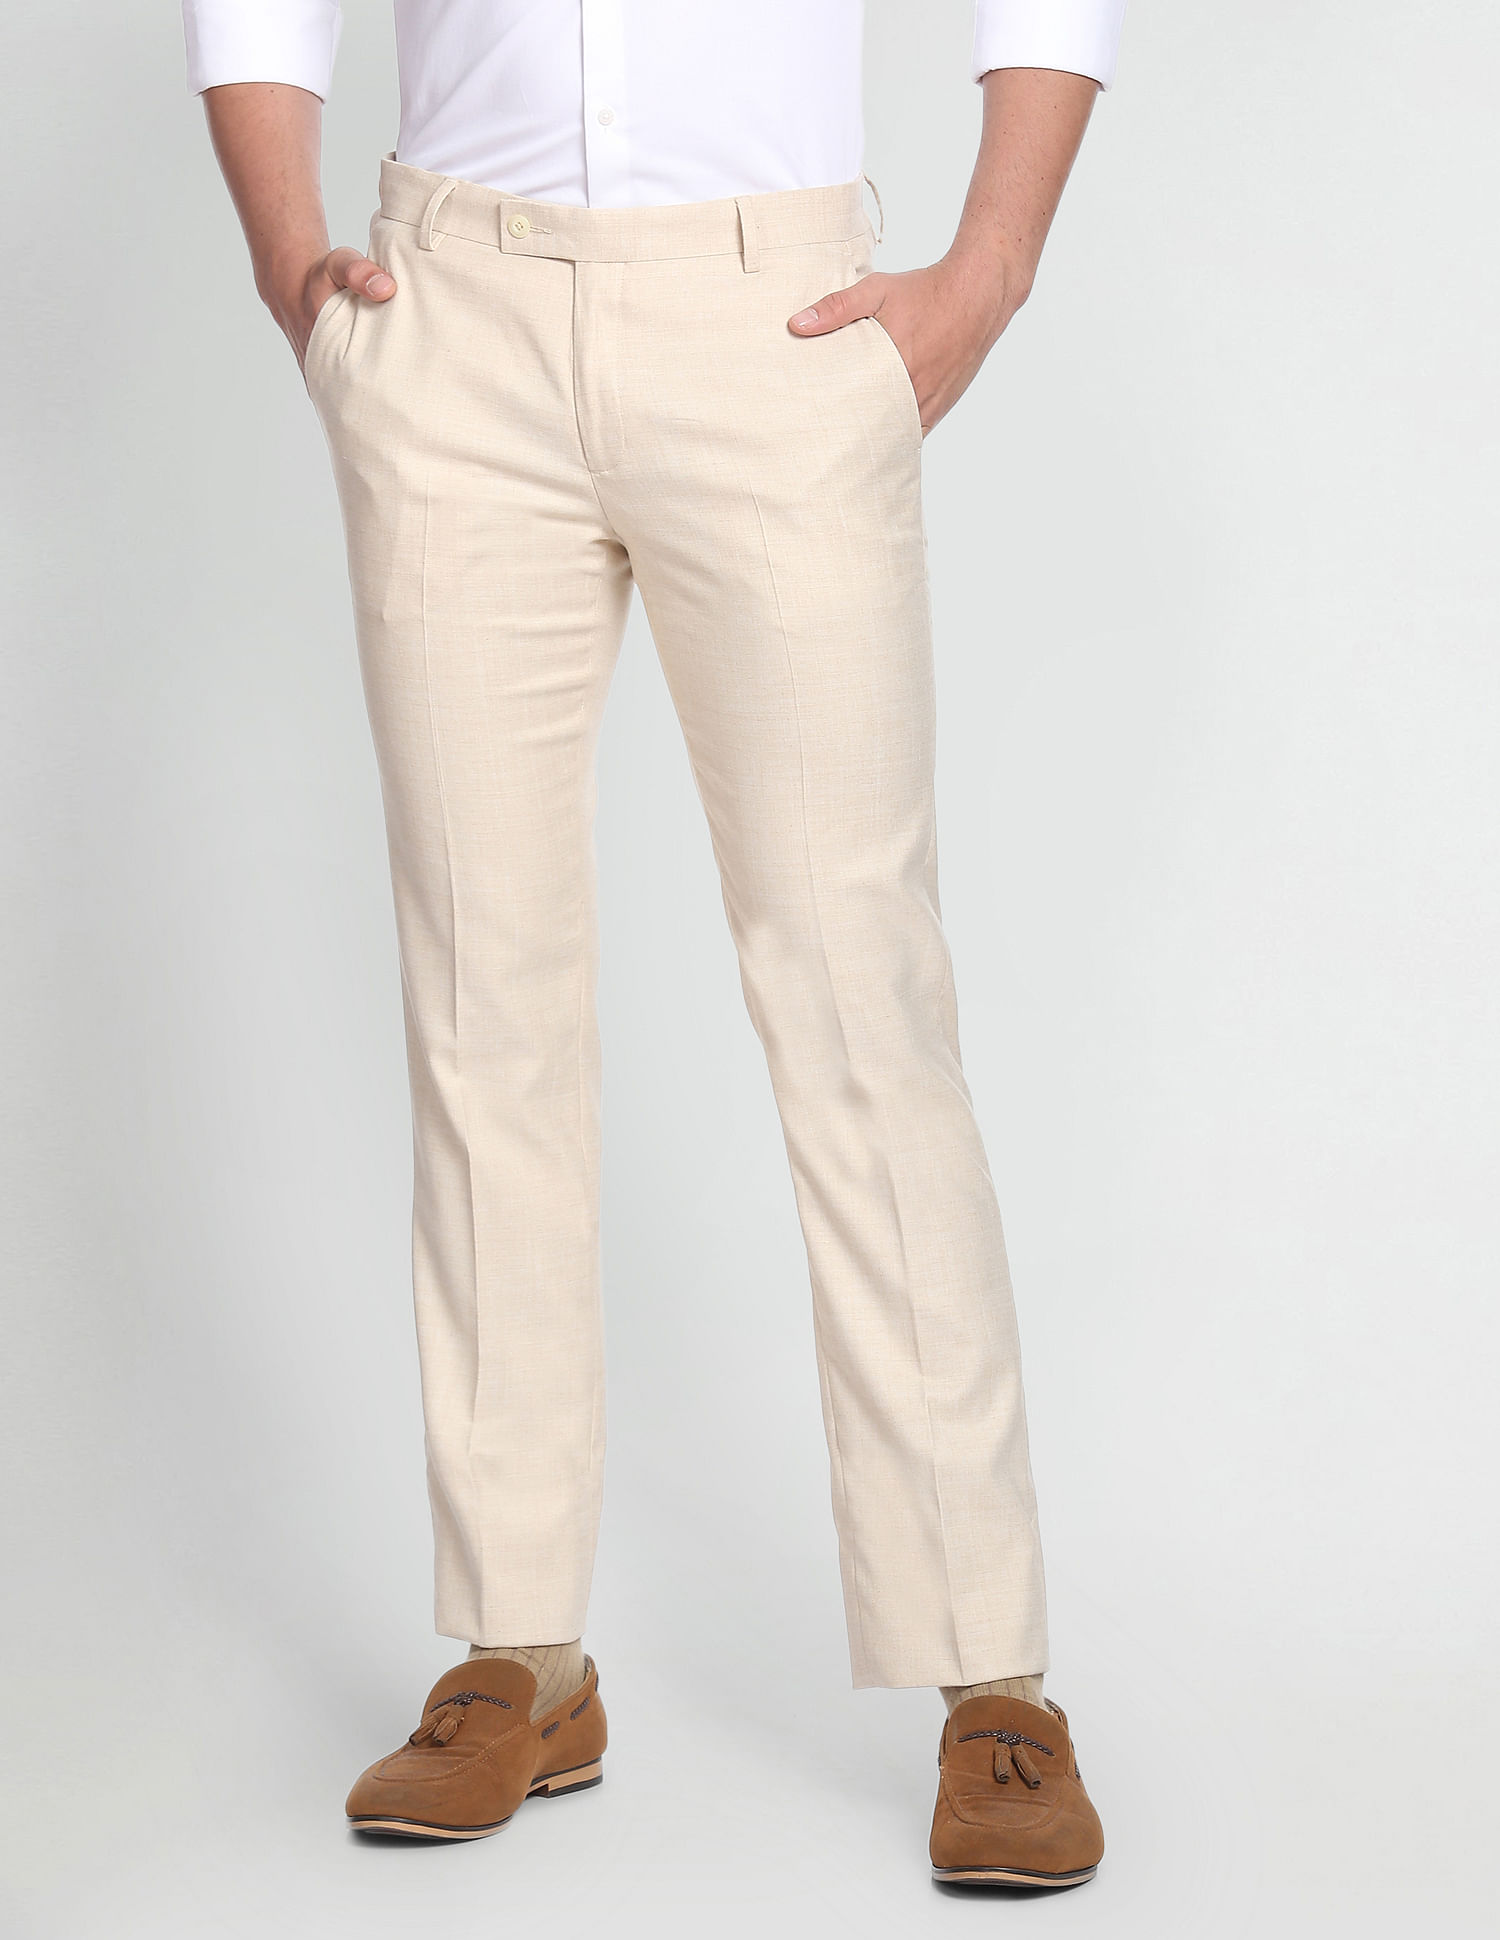 TheRealB Trousers and Pants  Buy TheRealB Structured Tailored Pants Online   Nykaa Fashion